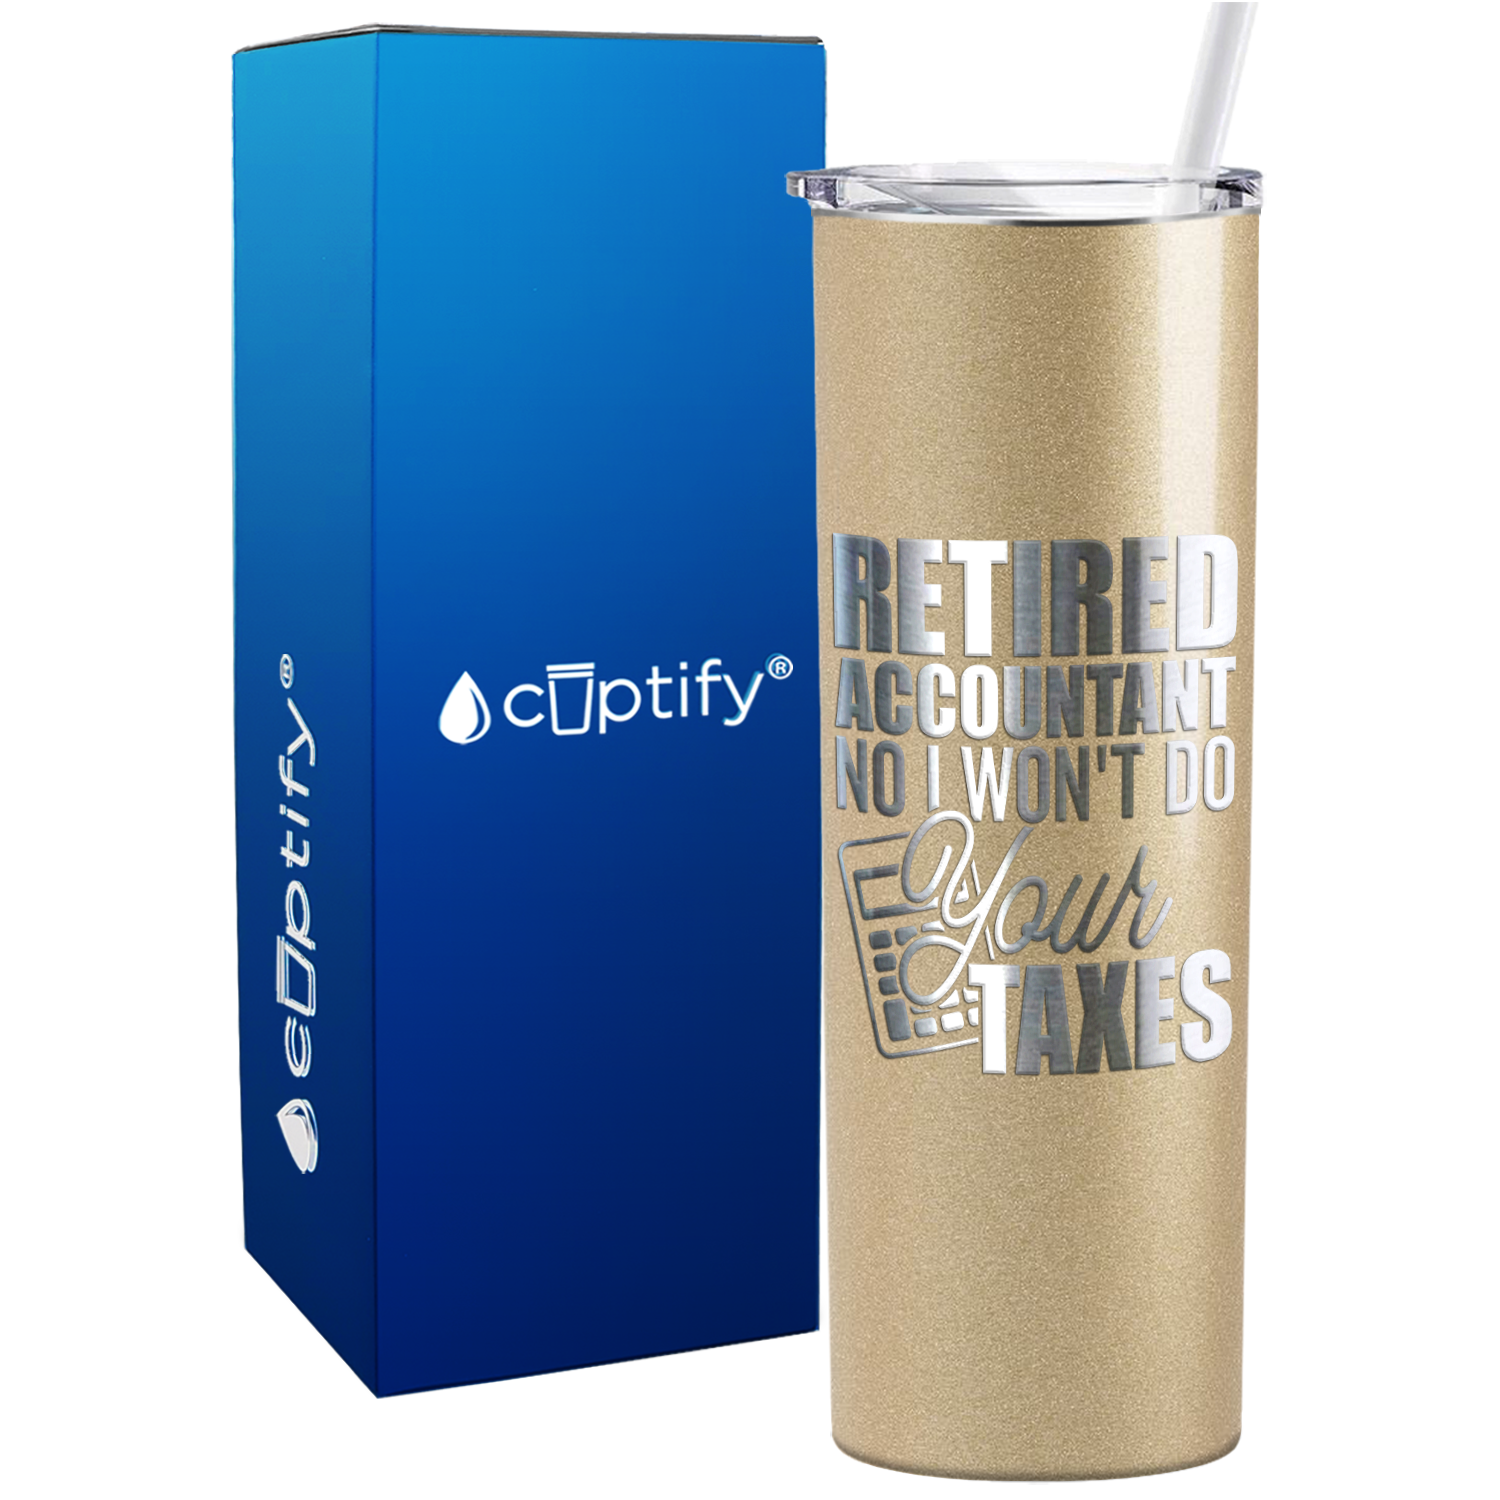 Retired Accountant No I Wont do Your Taxes on 20oz Skinny Stainless Steel Tumbler